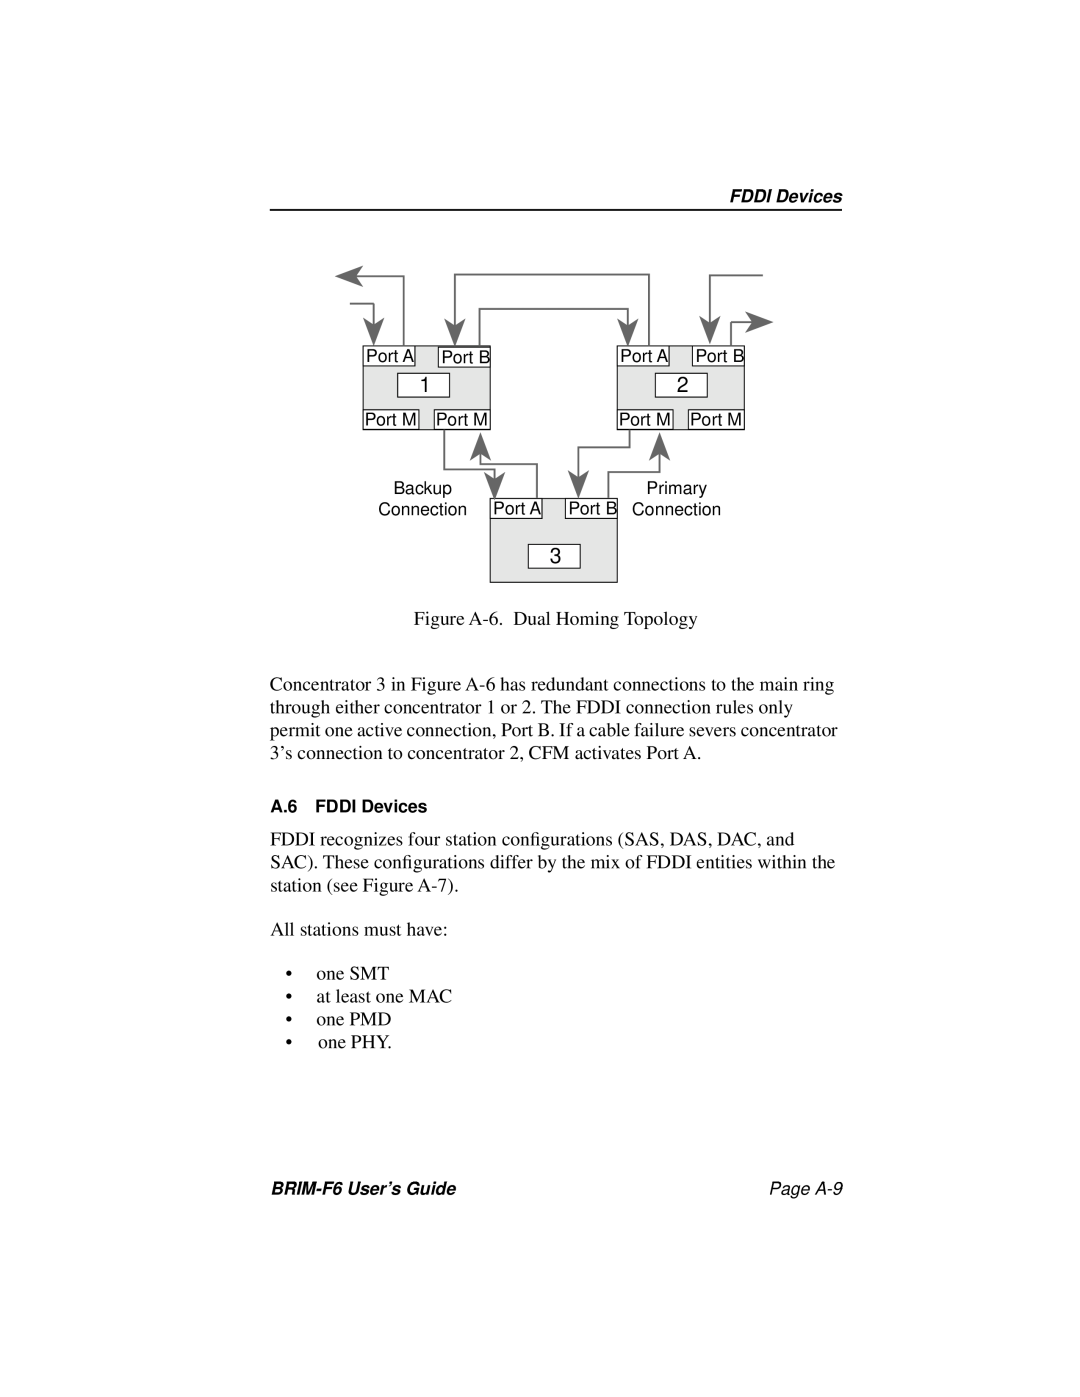 Cabletron Systems BRIM-F6 manual Figure A-6. Dual Homing Topology 